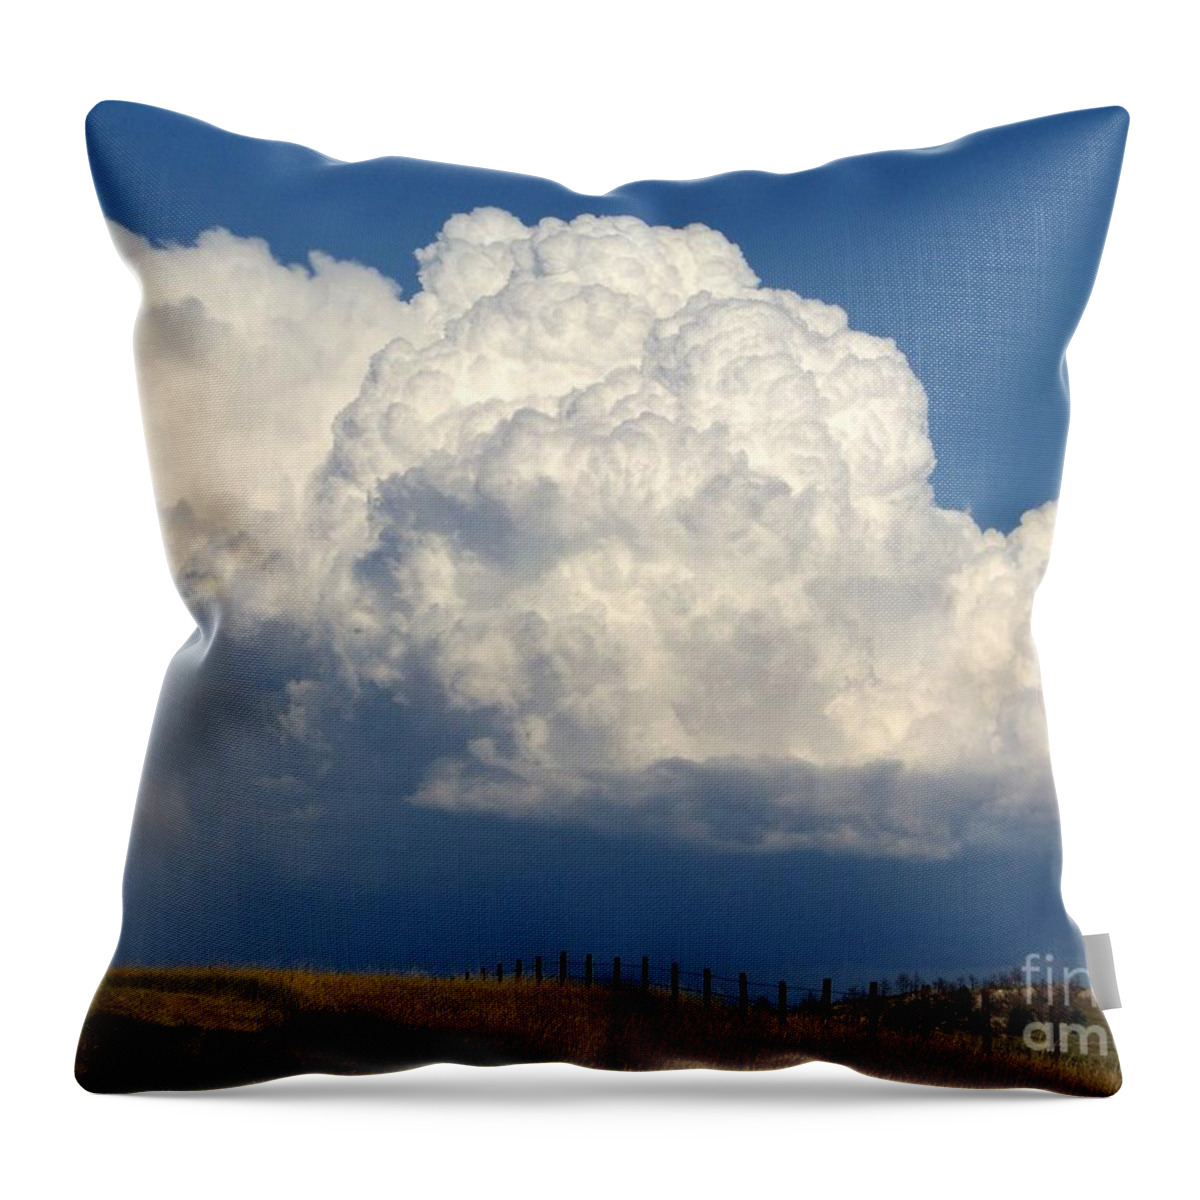 Clouds Throw Pillow featuring the photograph Storm's A Brewin' by Dorrene BrownButterfield